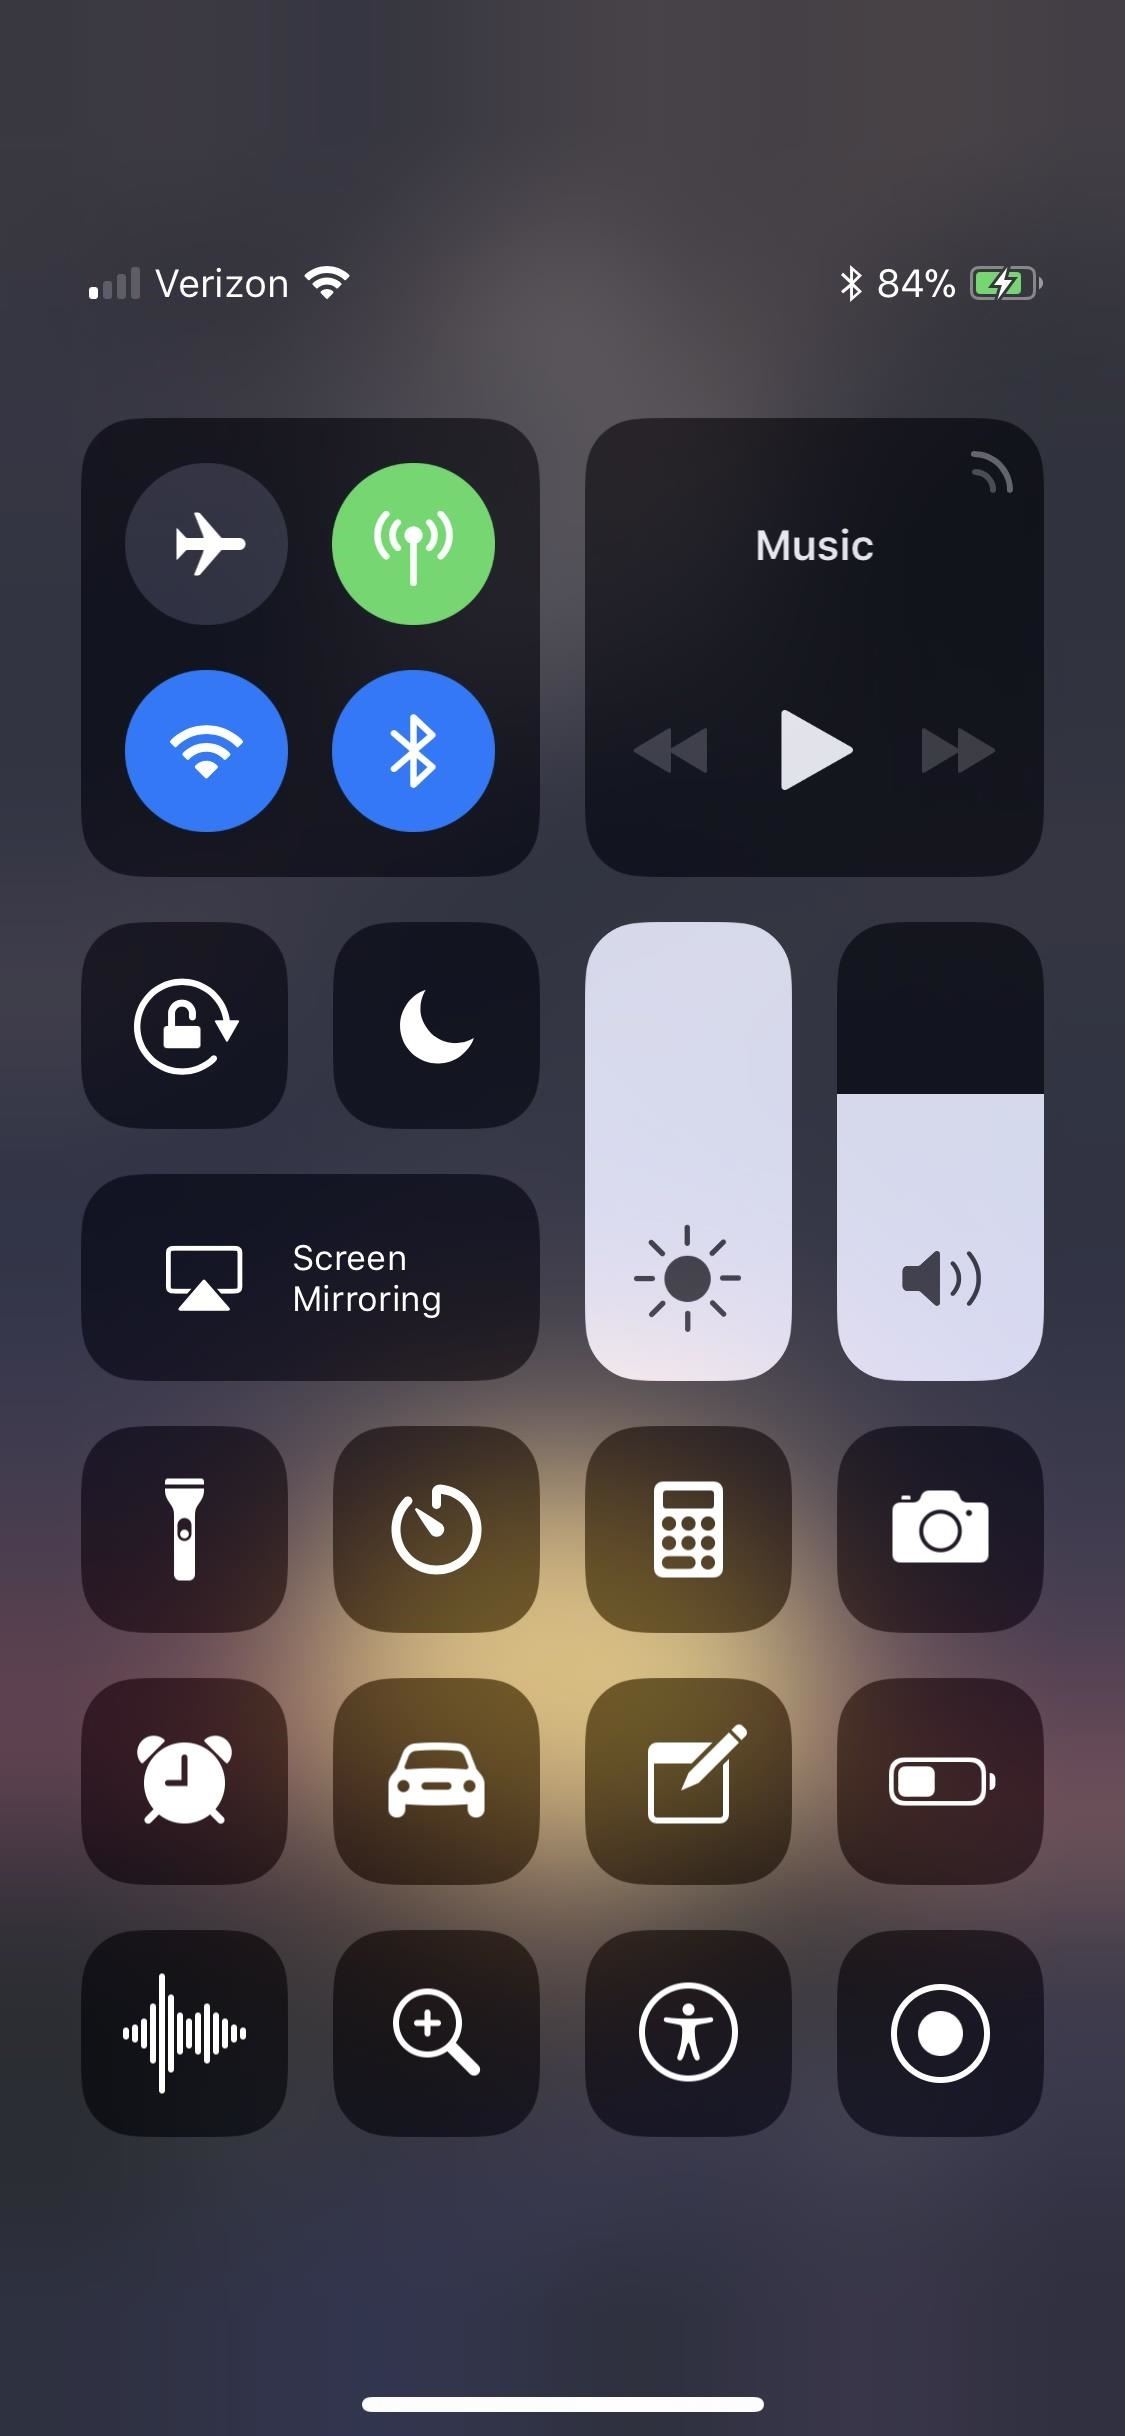 How to Open the Control Center on an iPhone Without a Home Button